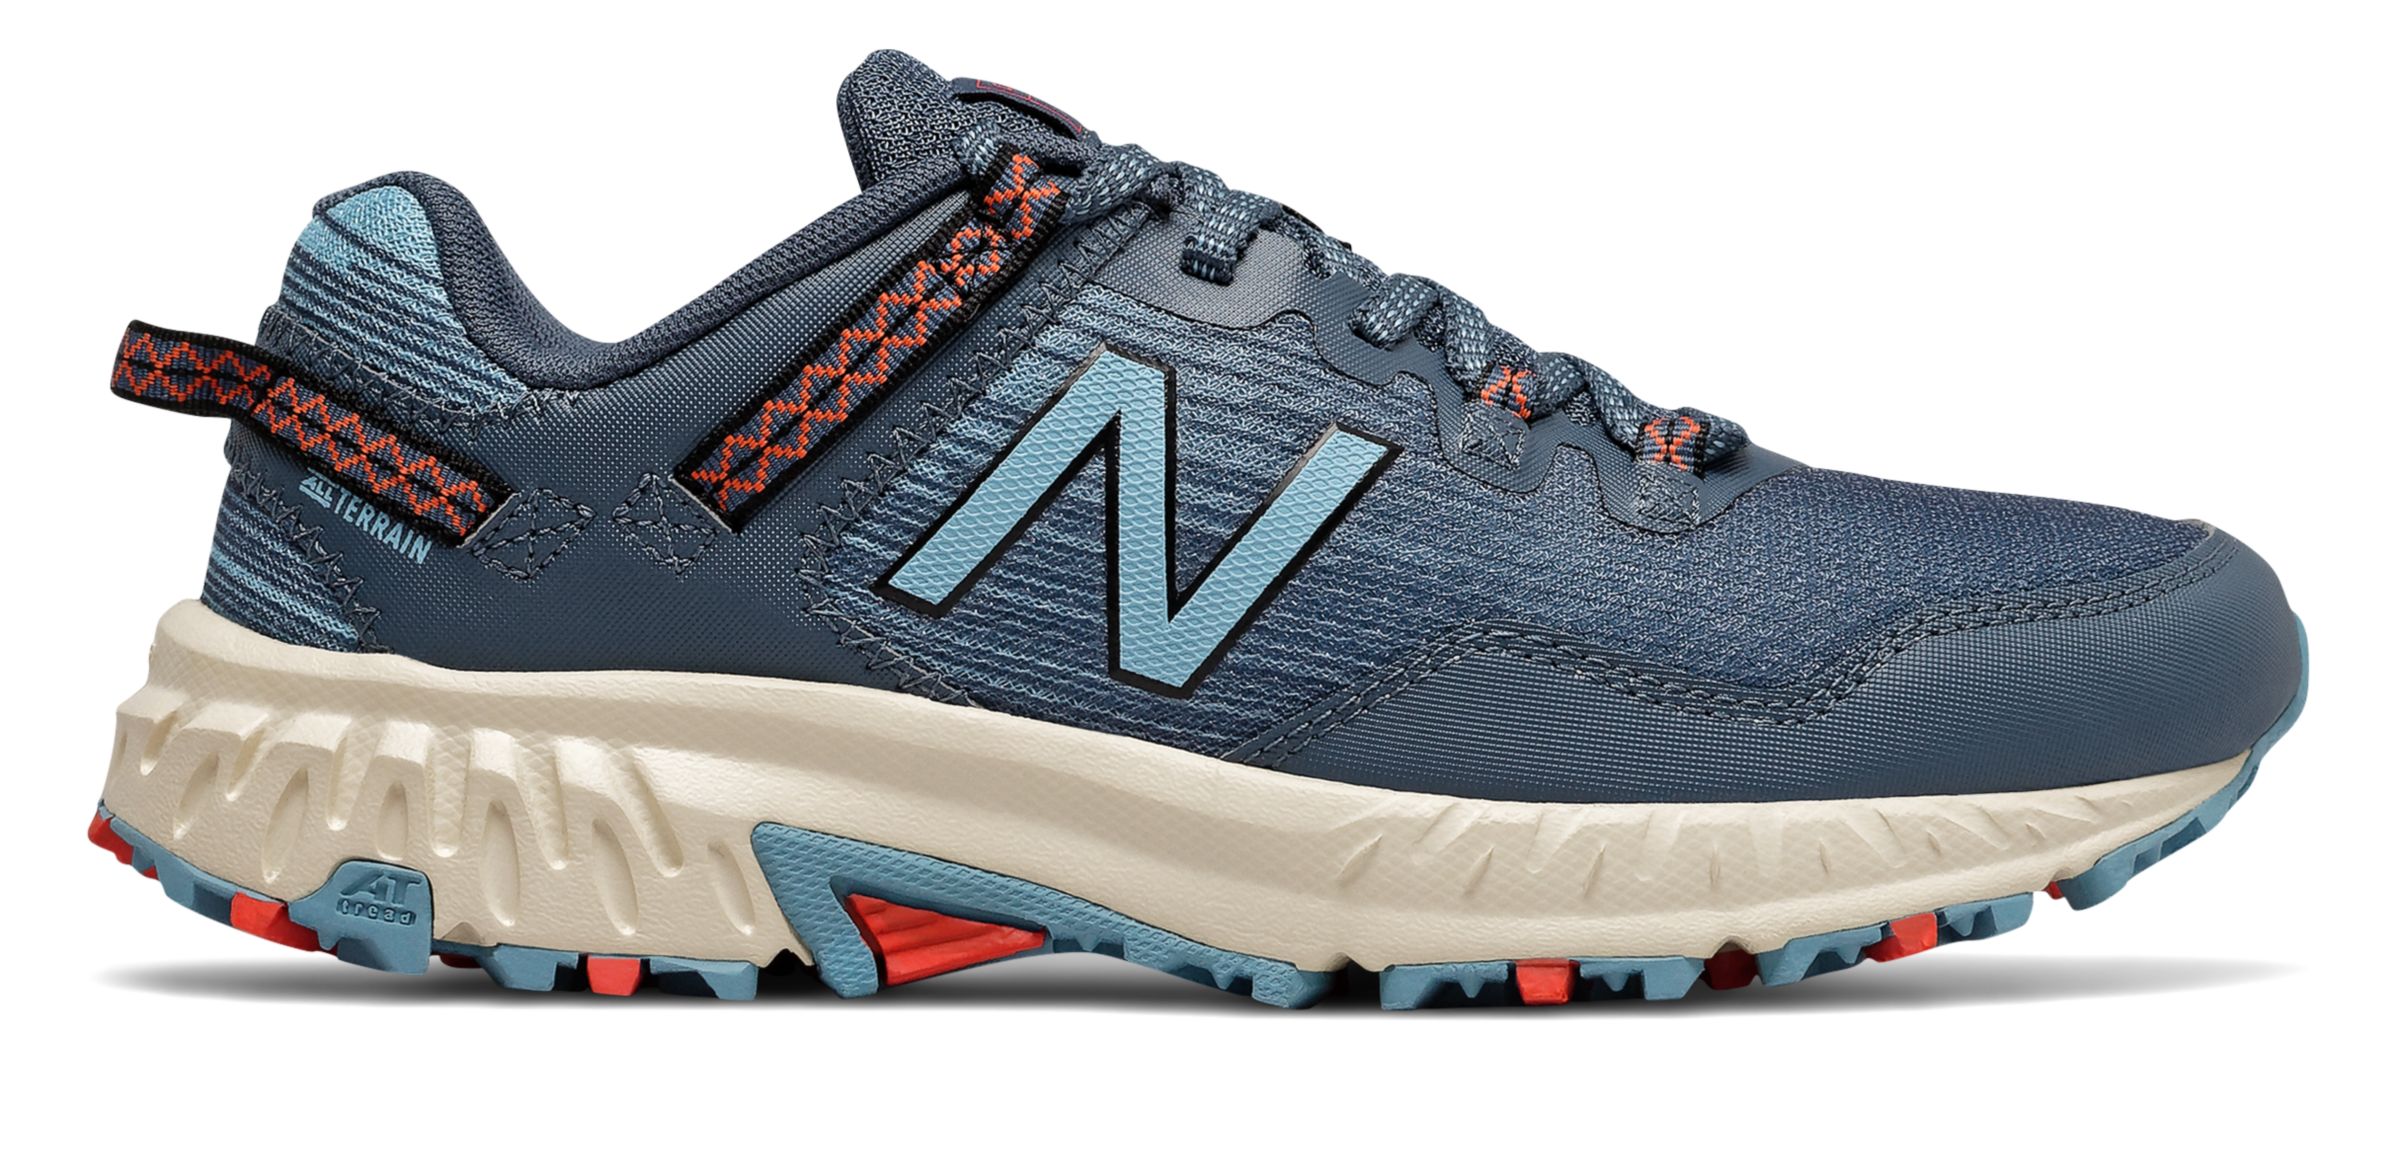 Off on WT410CS6 at Joe's New Balance Outlet